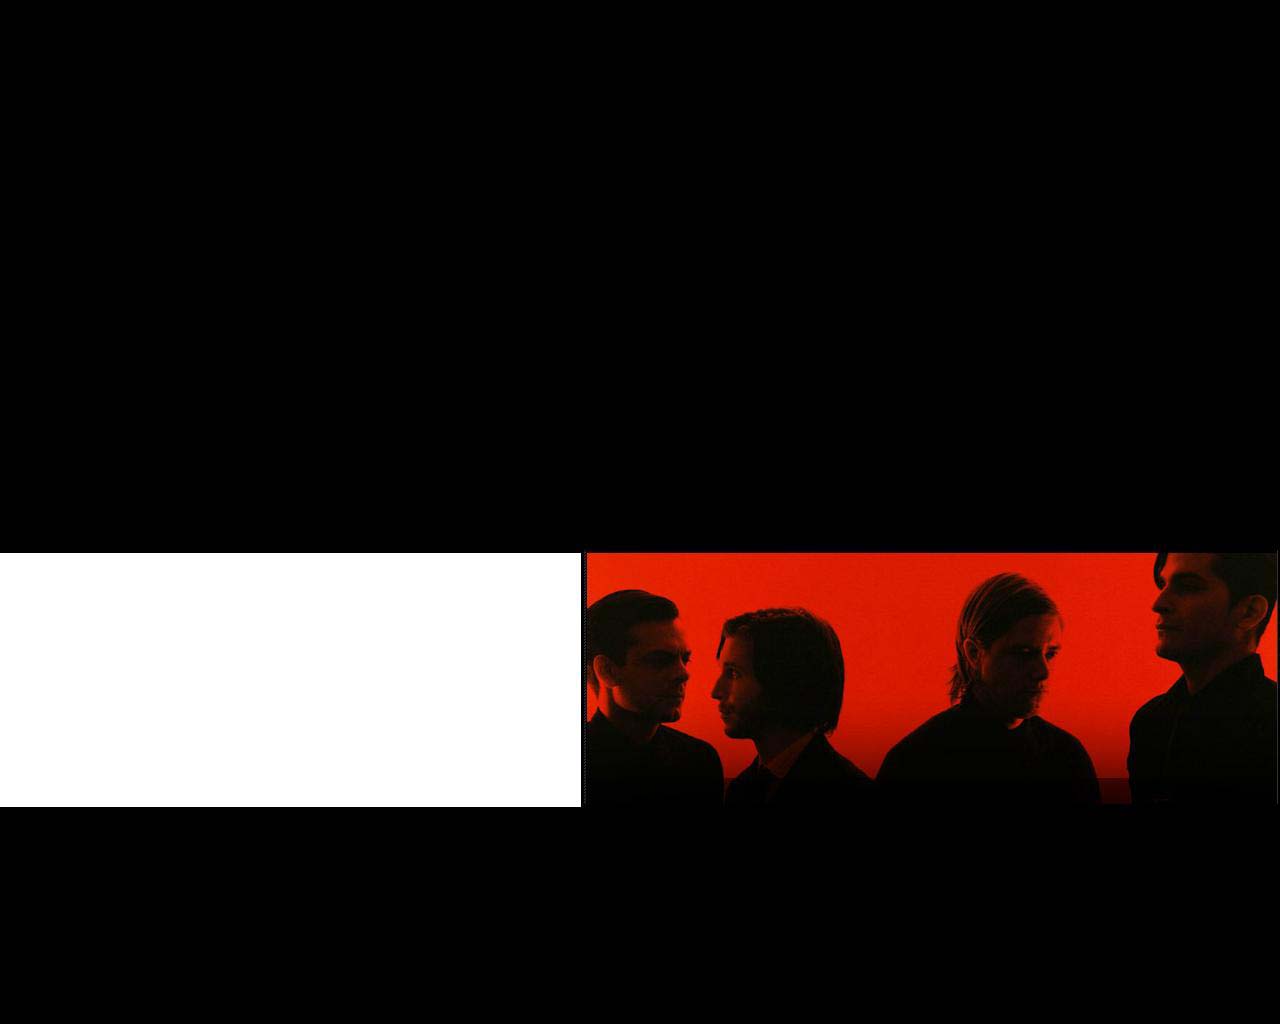 Interpol Image HD Wallpaper And Background Photos